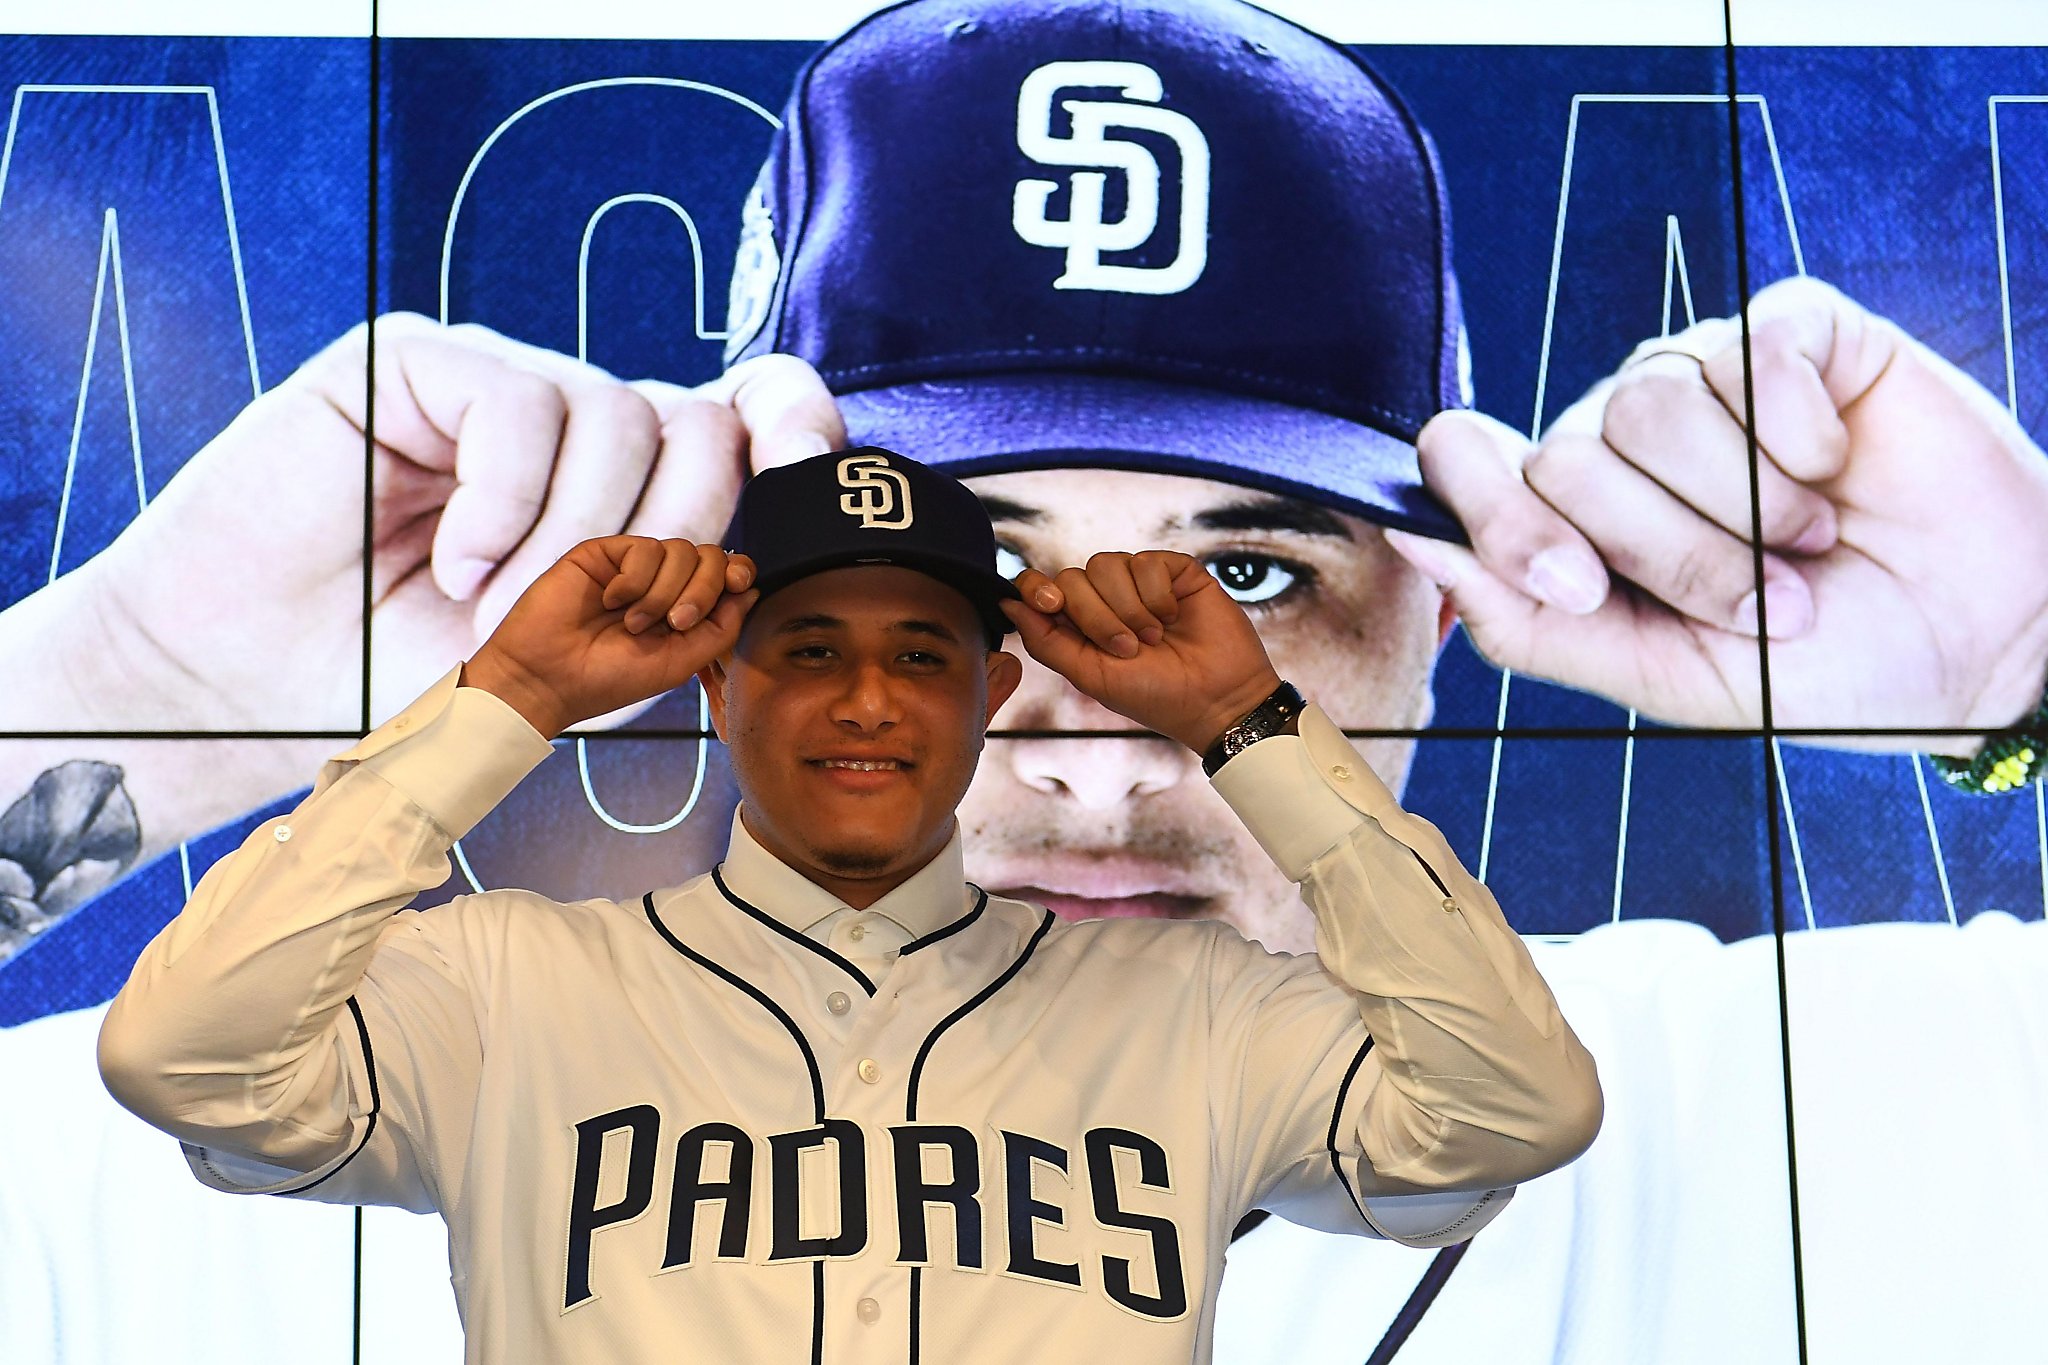 Manny Machado, Padres Agree to 10-Year, $300 Million Deal - WSJ